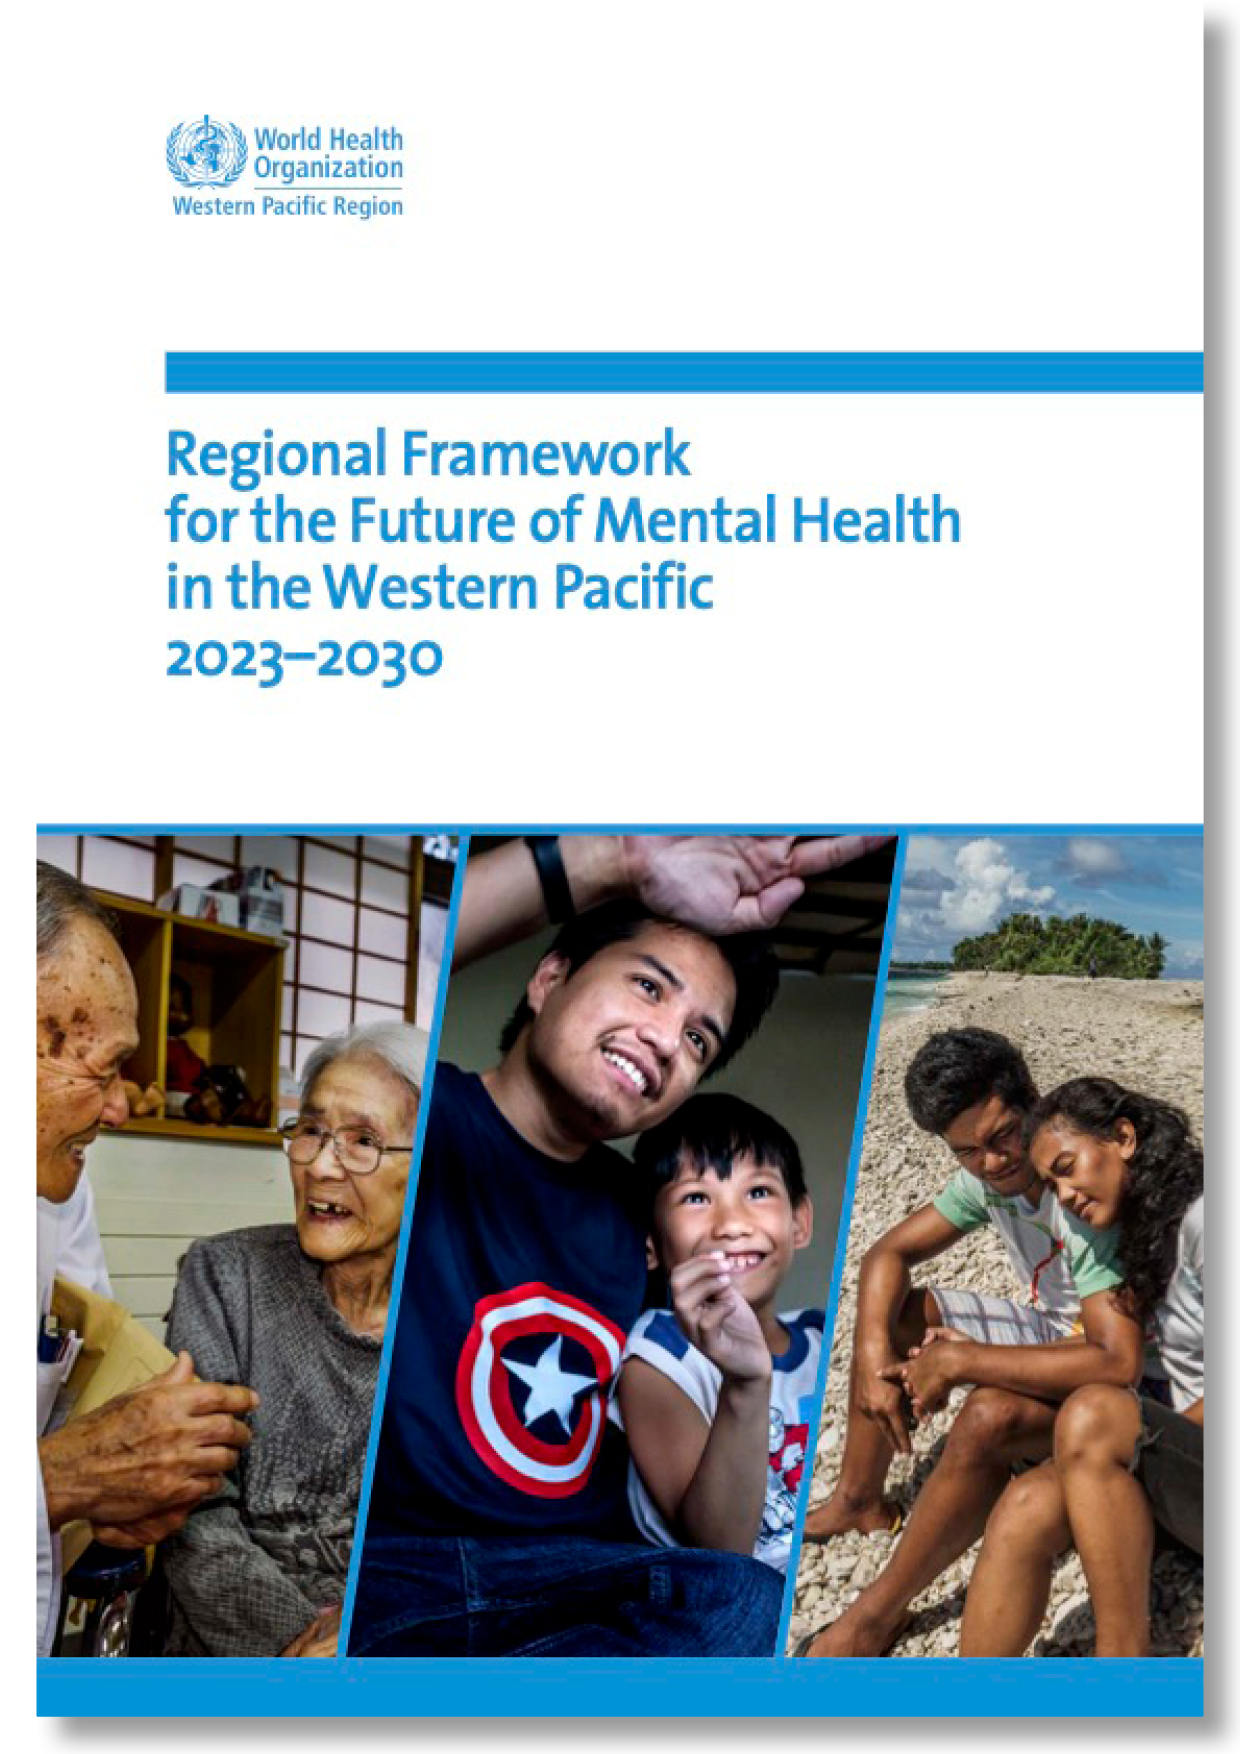 WHO Regional framework for the future of mental health in the Western Pacific 2023-2030